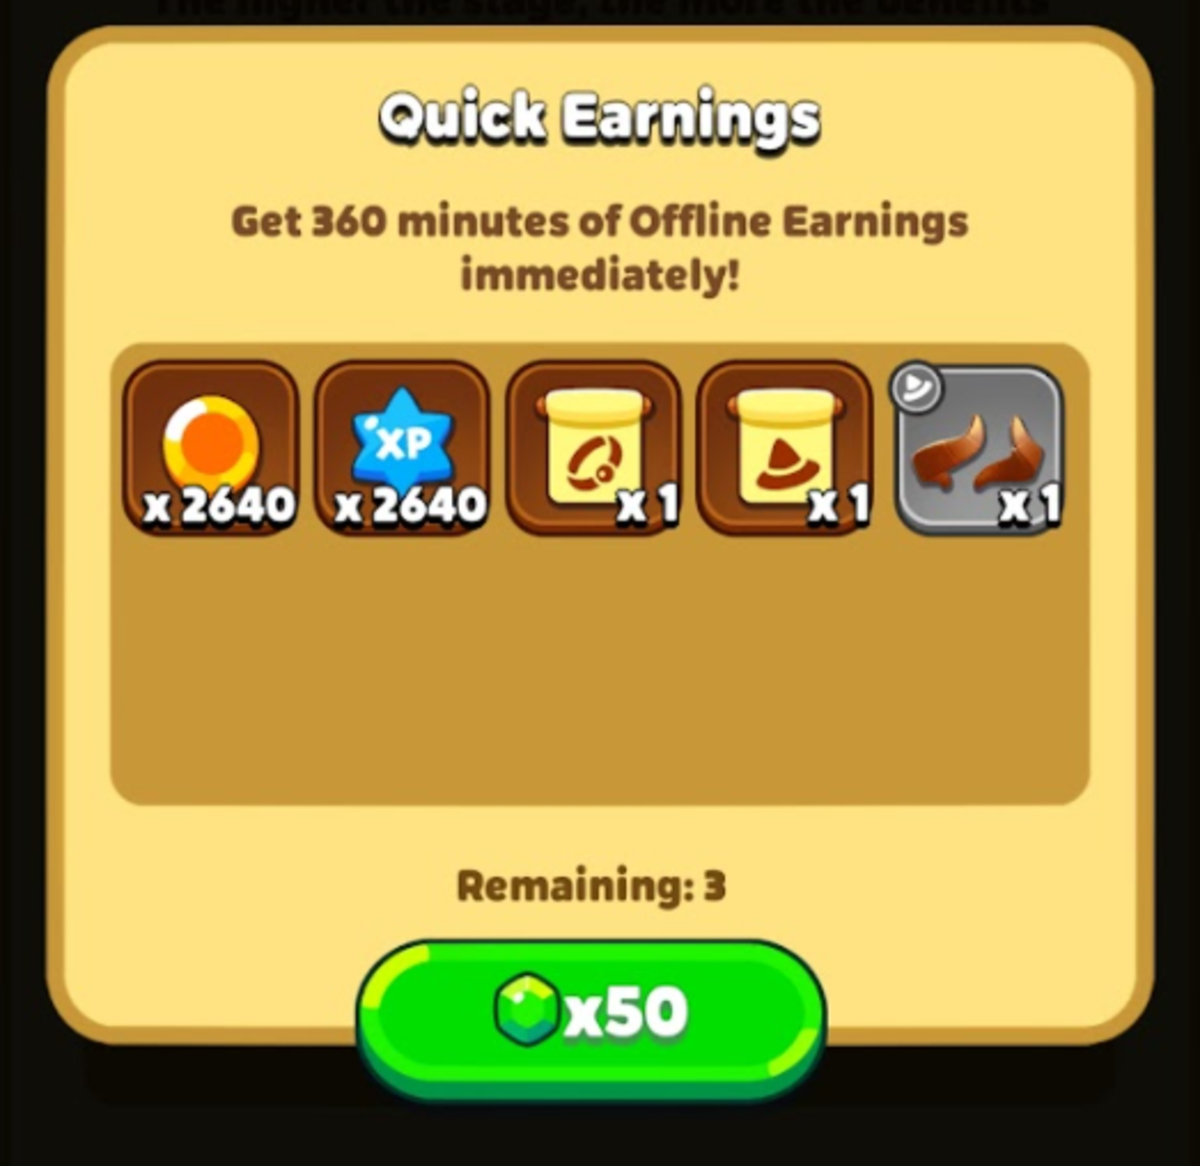 Pay 50 gems, or sometimes you are able to just watch an ad, to receive 360 minutes of rewards. This can include items!